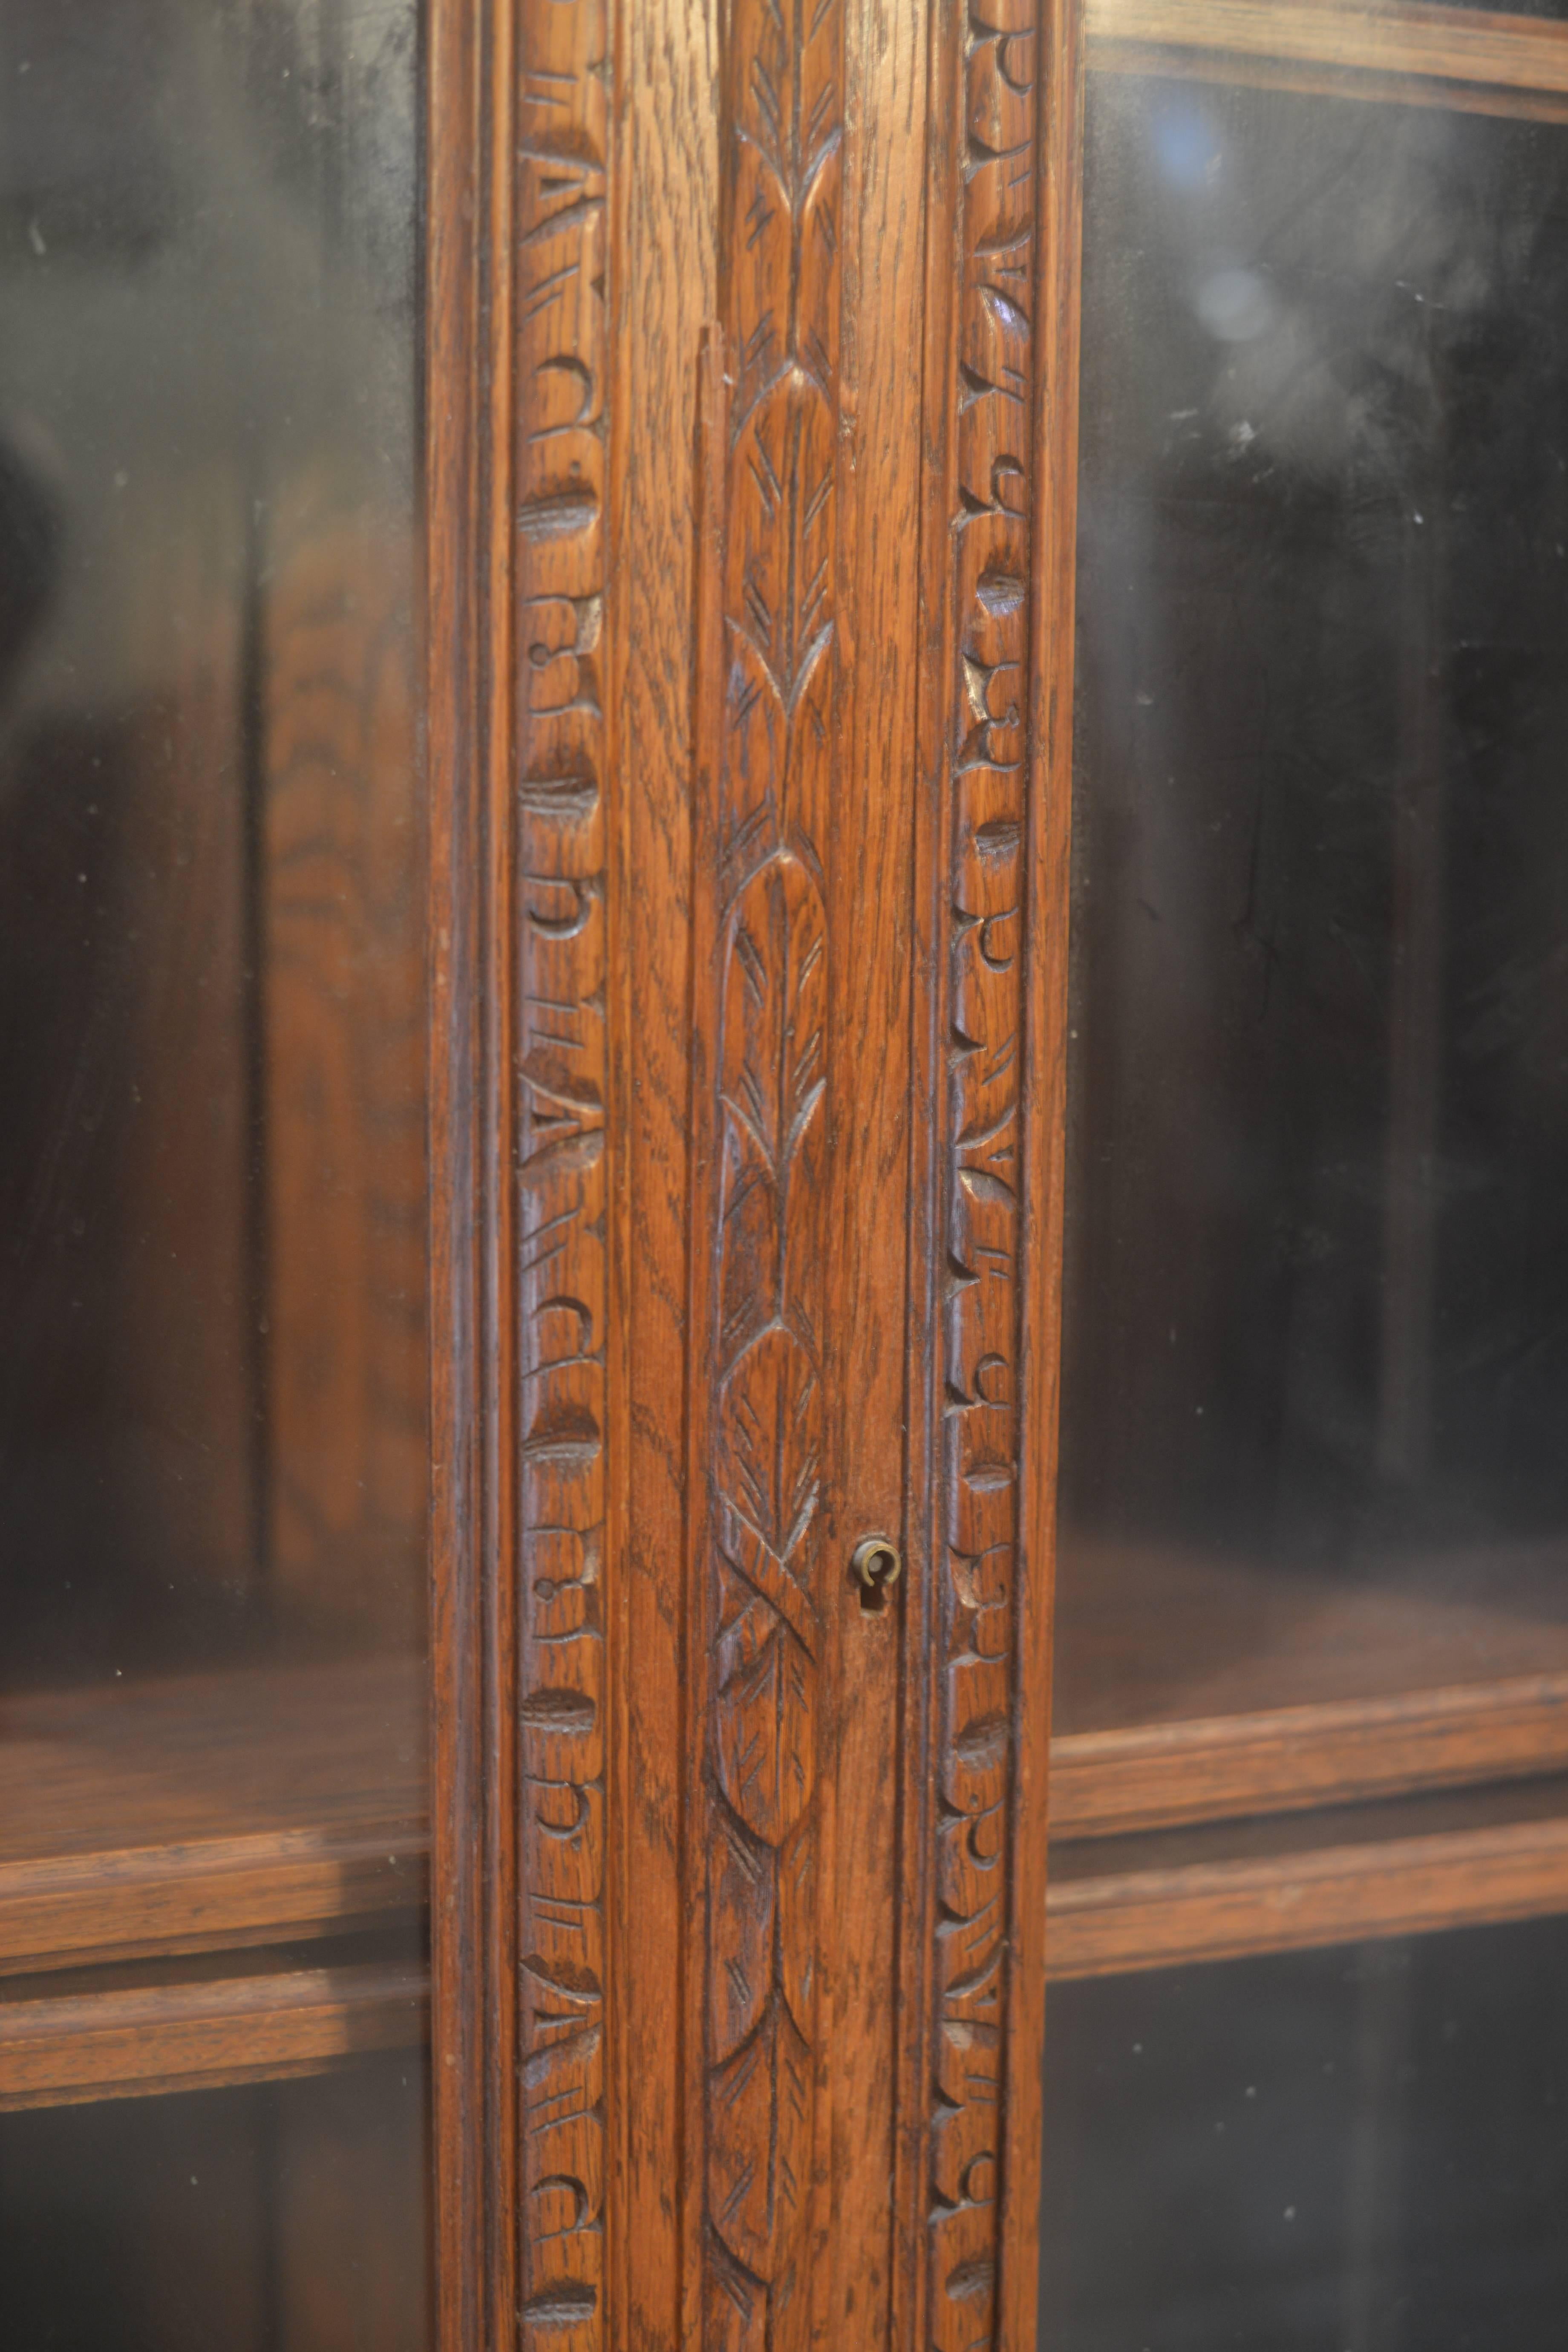 French antique bookcase or curio cabinet. Made of French oak, this bookcase features beautiful carvings. There are three adjustable shelves with original hardware. Great size, a piece that can fit in smaller spaces. Mint condition, circa 1890. 